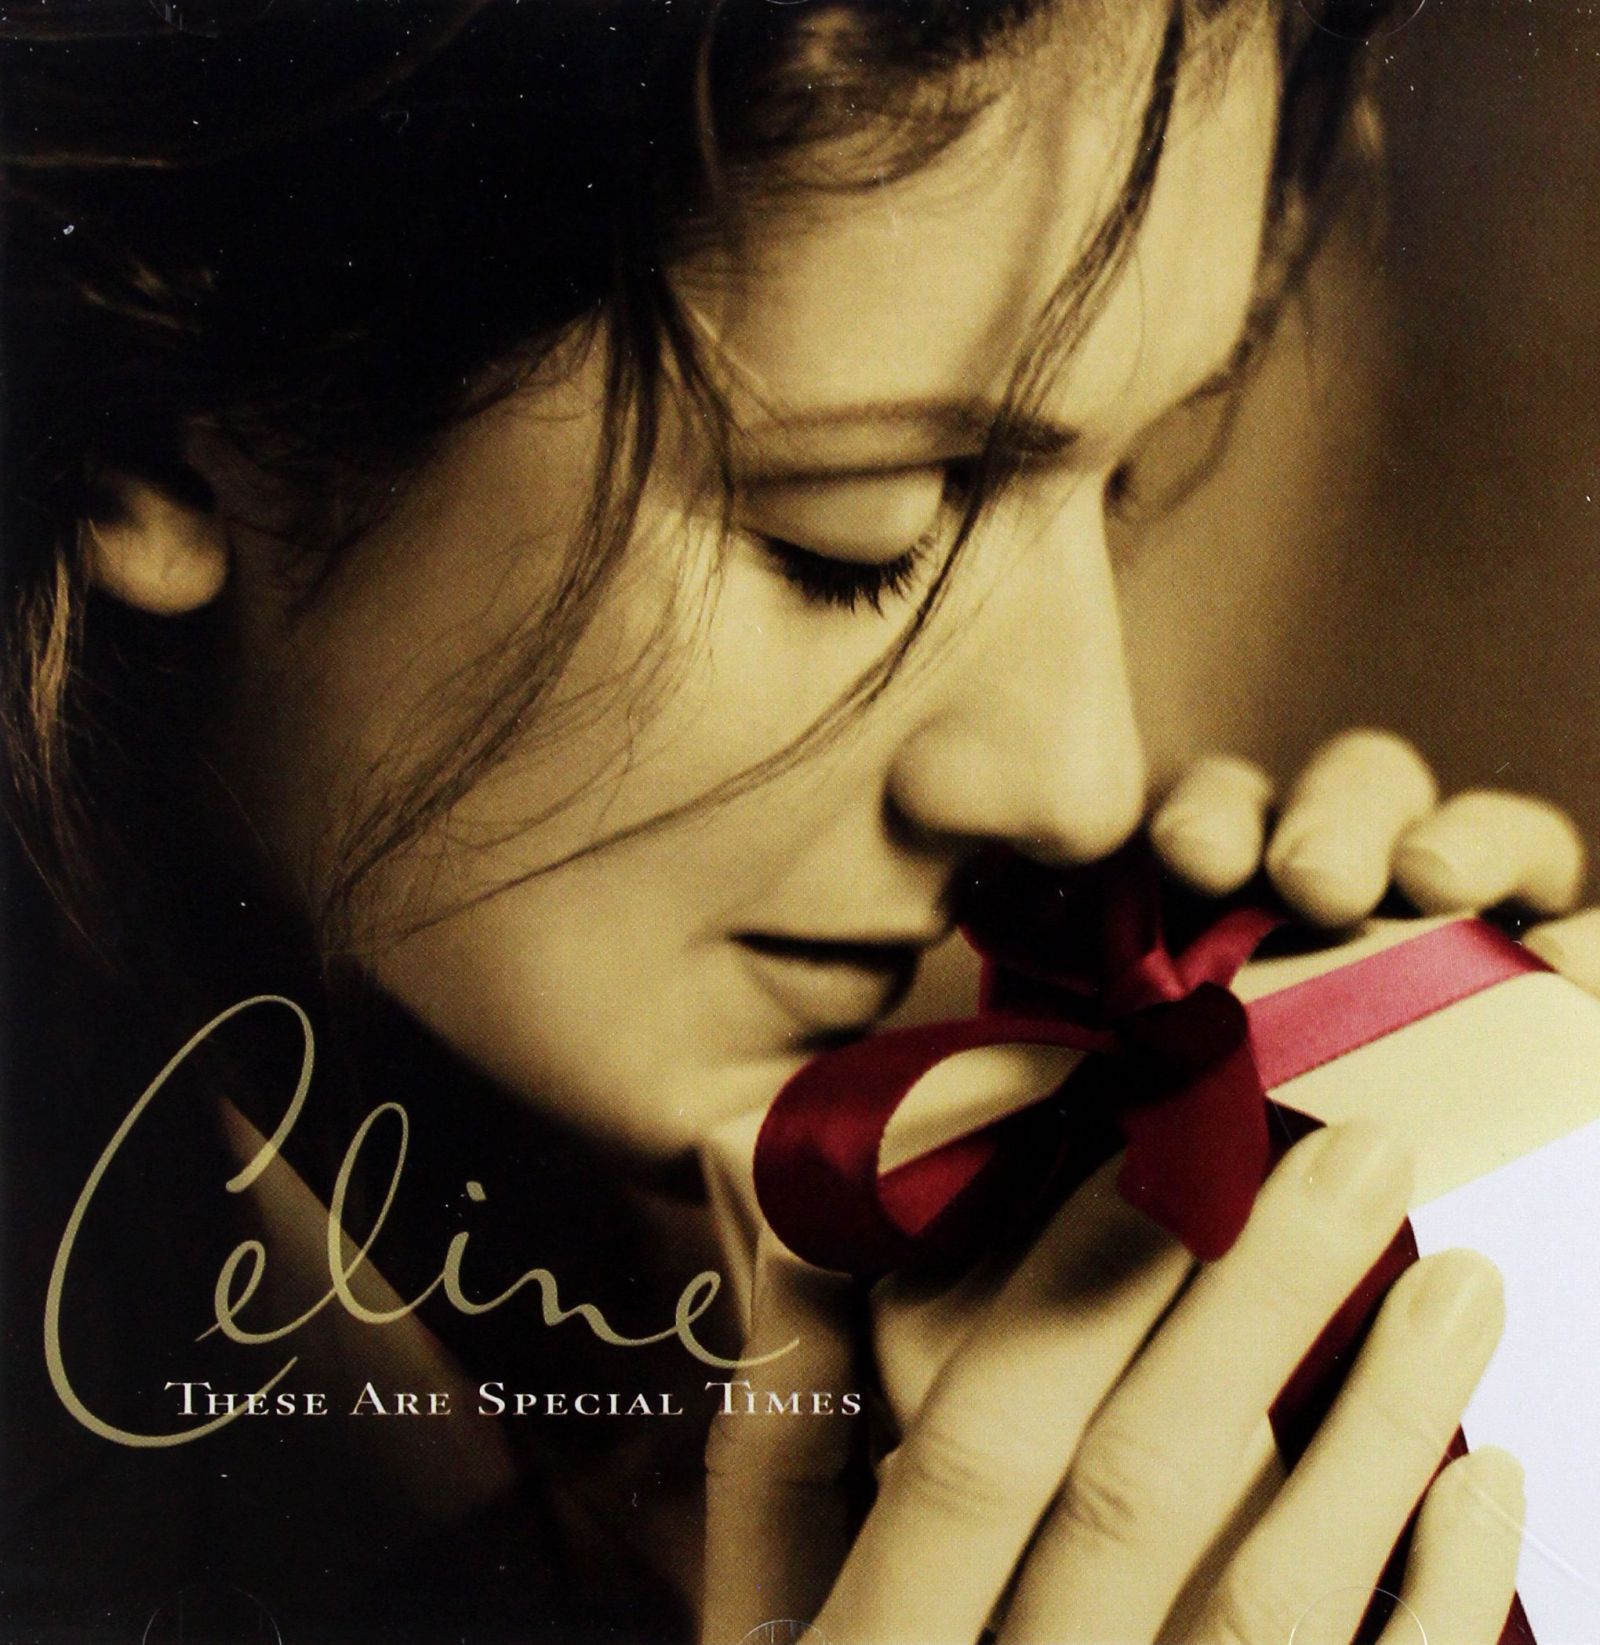 Celine Dion images Celine Dion - These are Special Times 